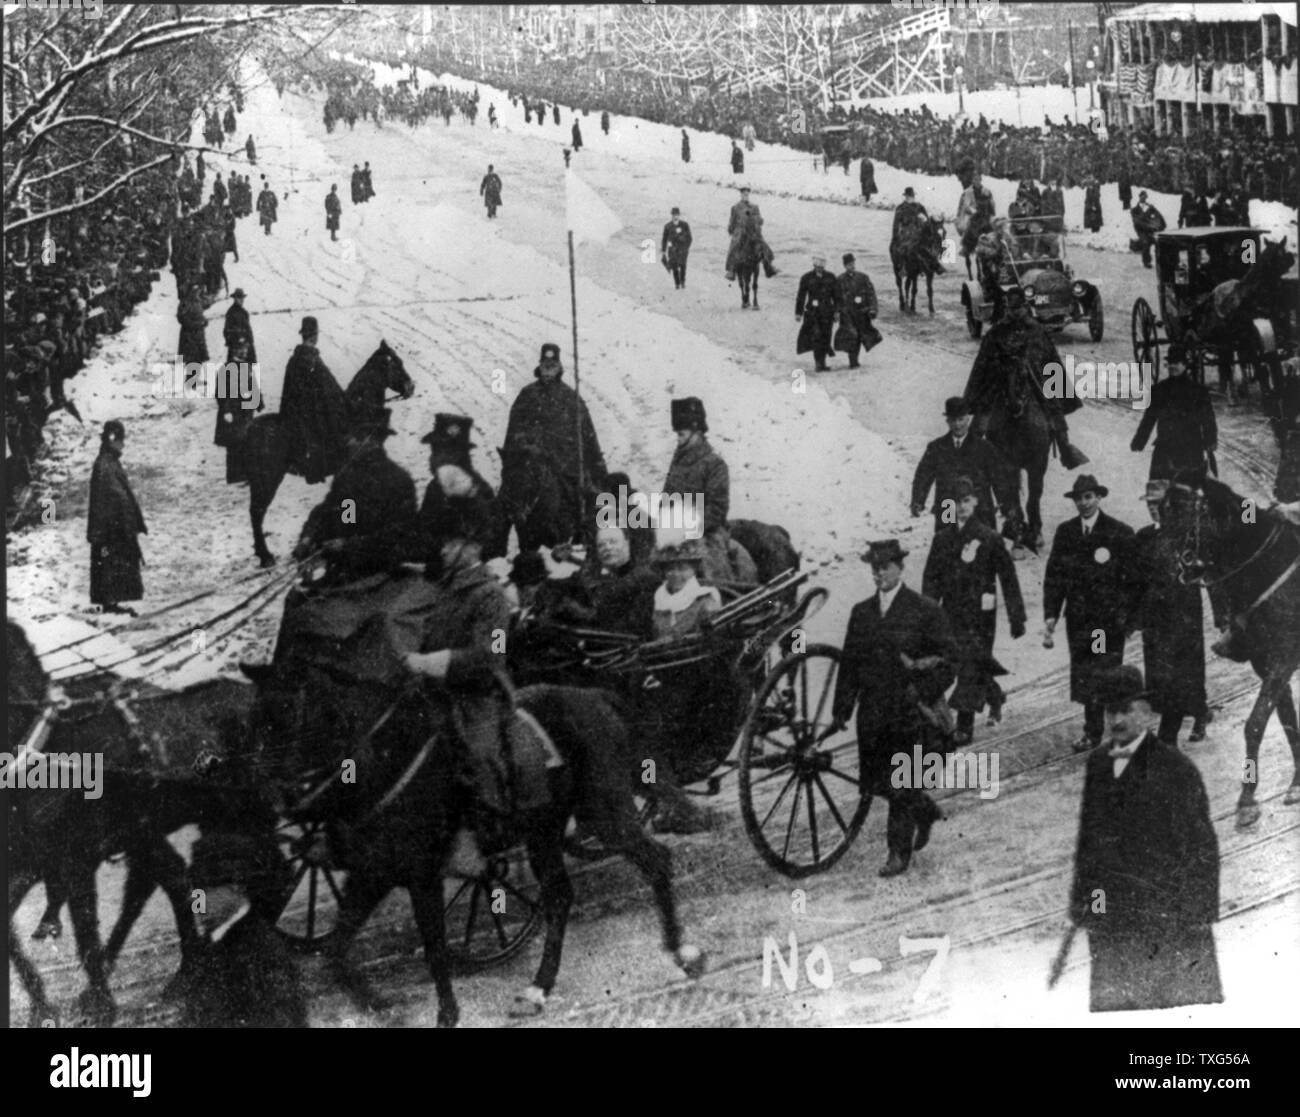 William Howard Taft, 27th President of the United States of America (1909-1913) Taft and his wife riding through Washington in an open carriage on his inauguration day Stock Photo